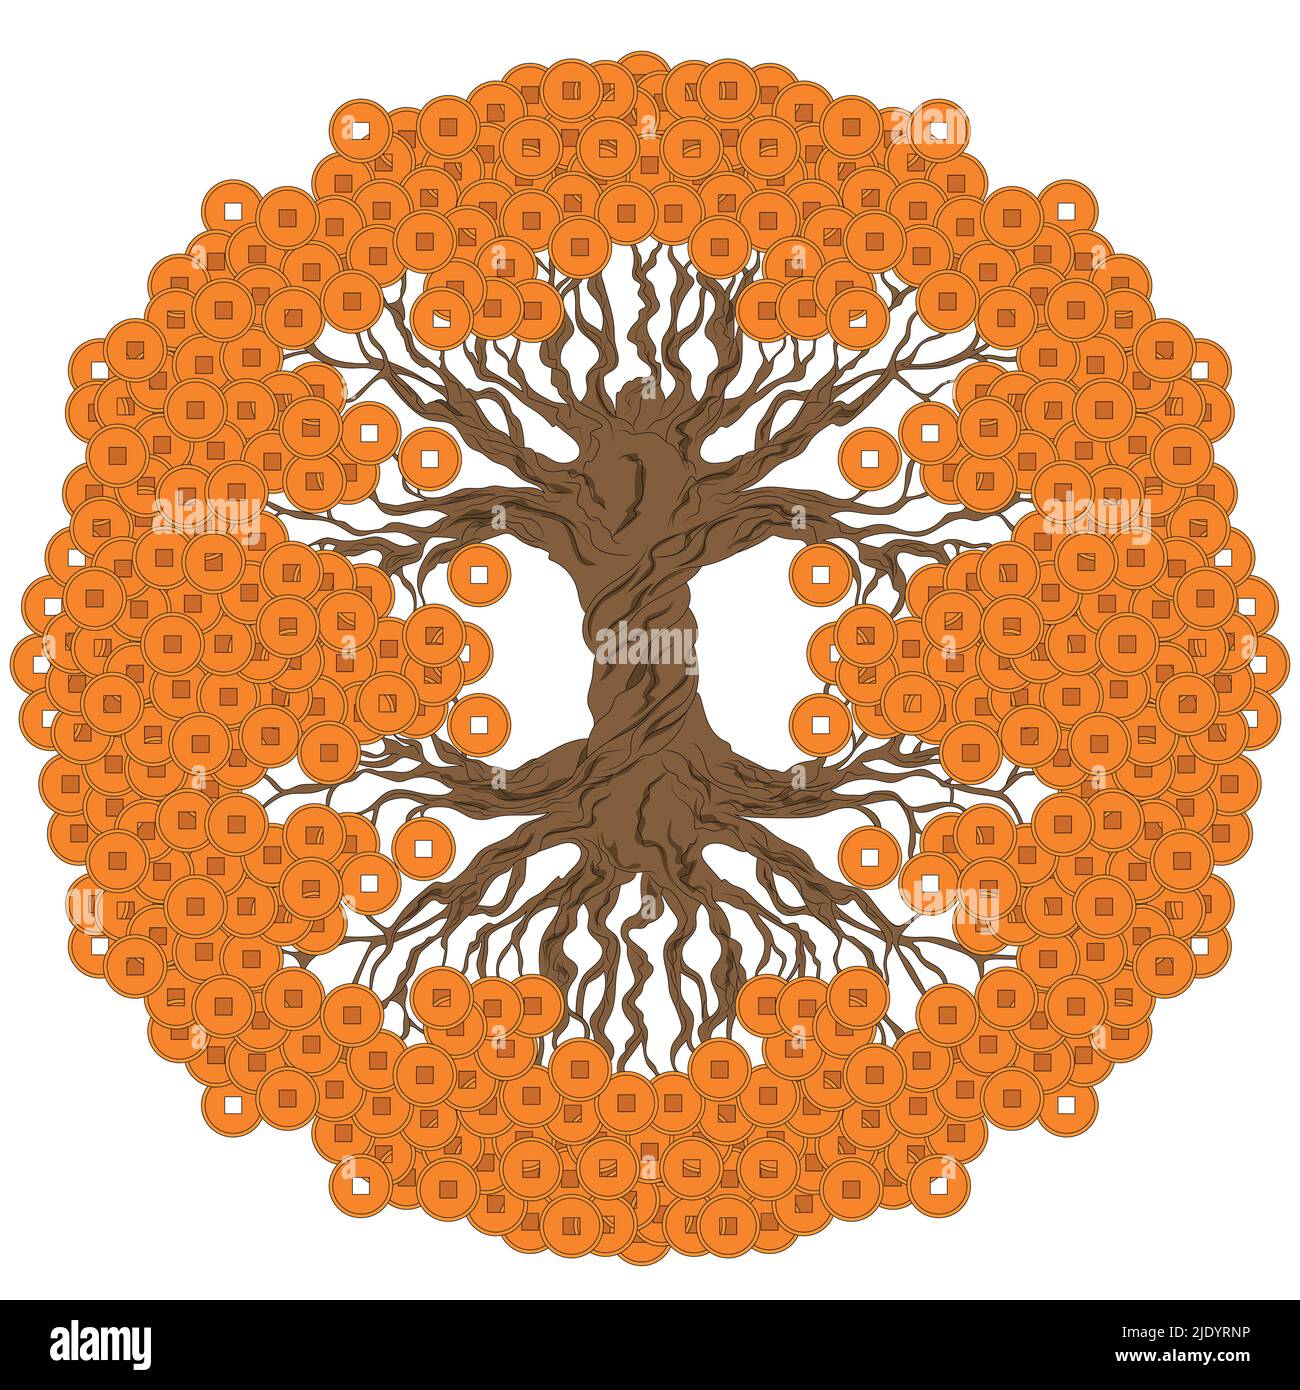 Money tree with Chinese coins. A traditional feng shui symbol for attracting wealth and prosperity. Color illustration. Stock Vector